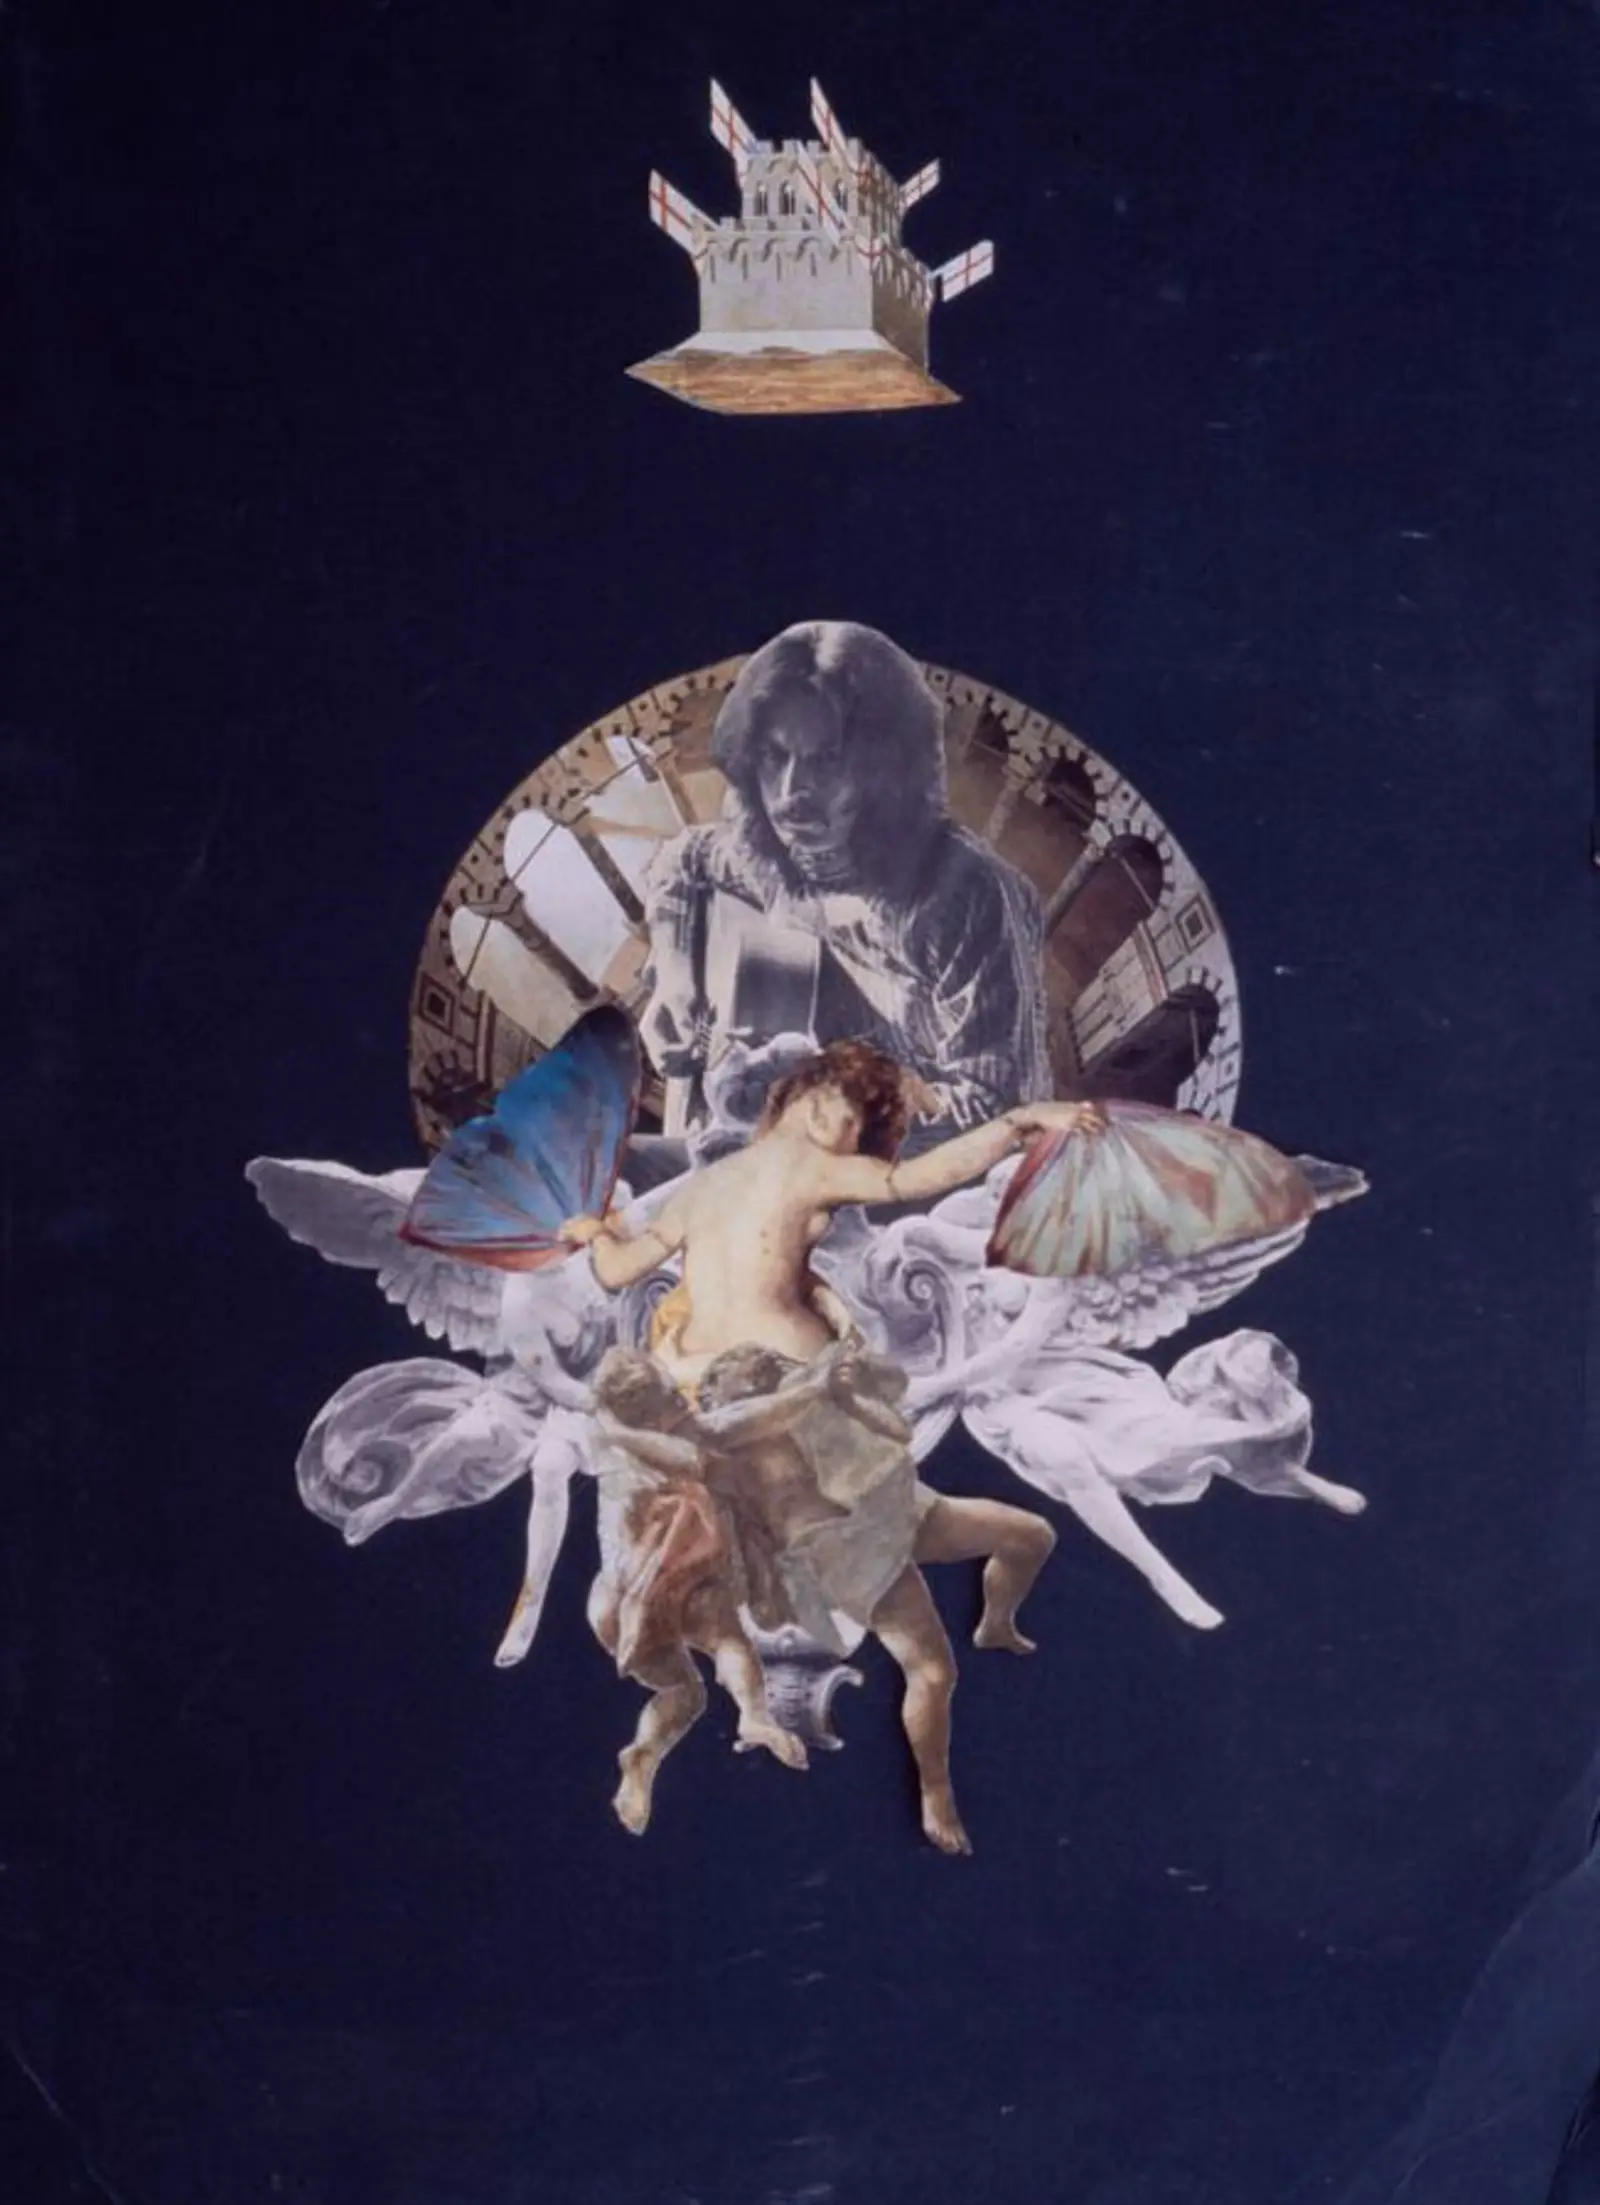 A collage featuring Eric Clapton playing guitar, with winged cherubs underneath him.